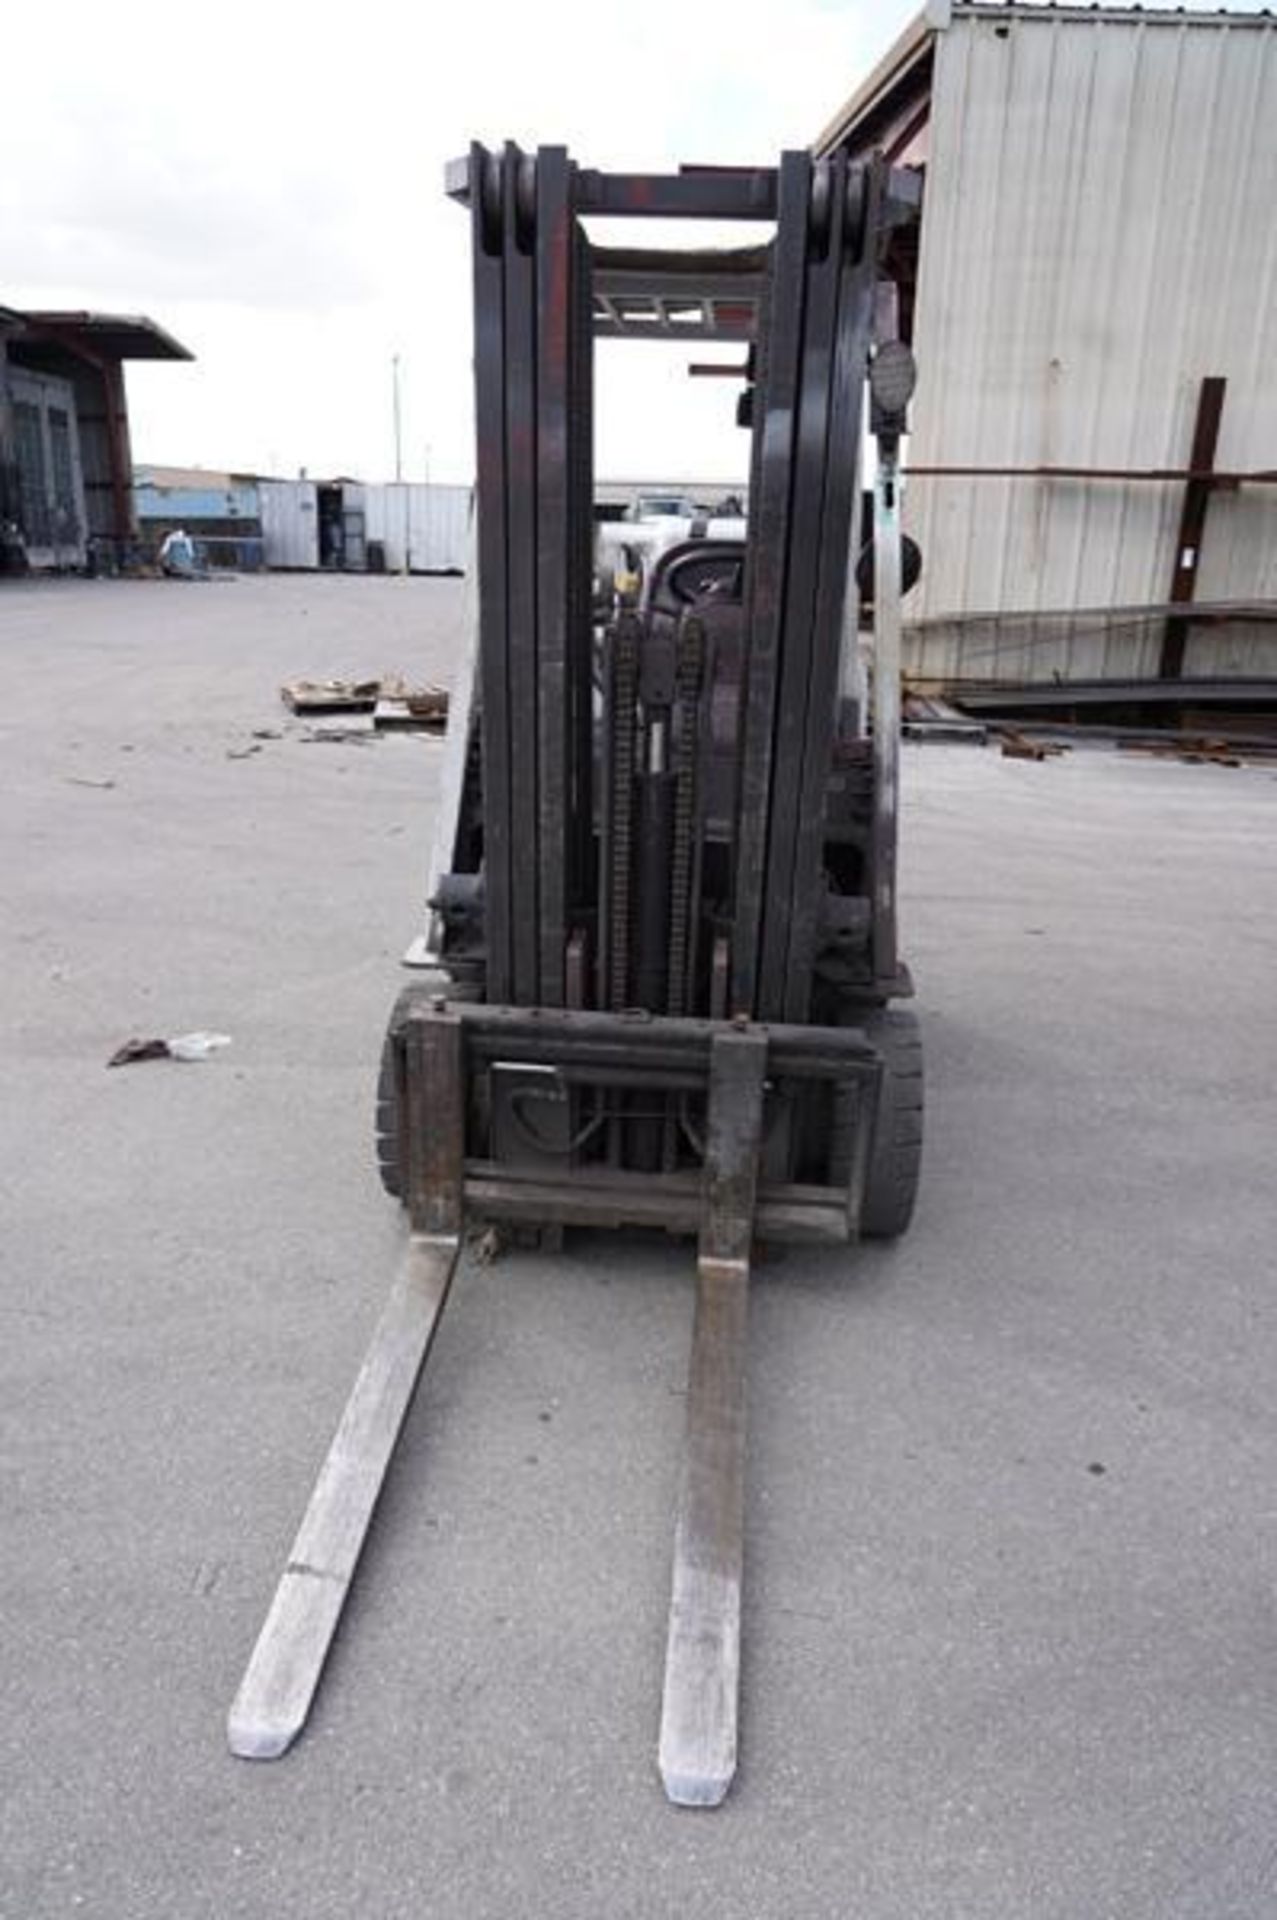 Nissan Mdl: MAPIF2A25LV 5,000 Lbs Propane Forklift, 5,000 Lbs Lift Capacity, Max Lift Height 14' 2'' - Image 3 of 11